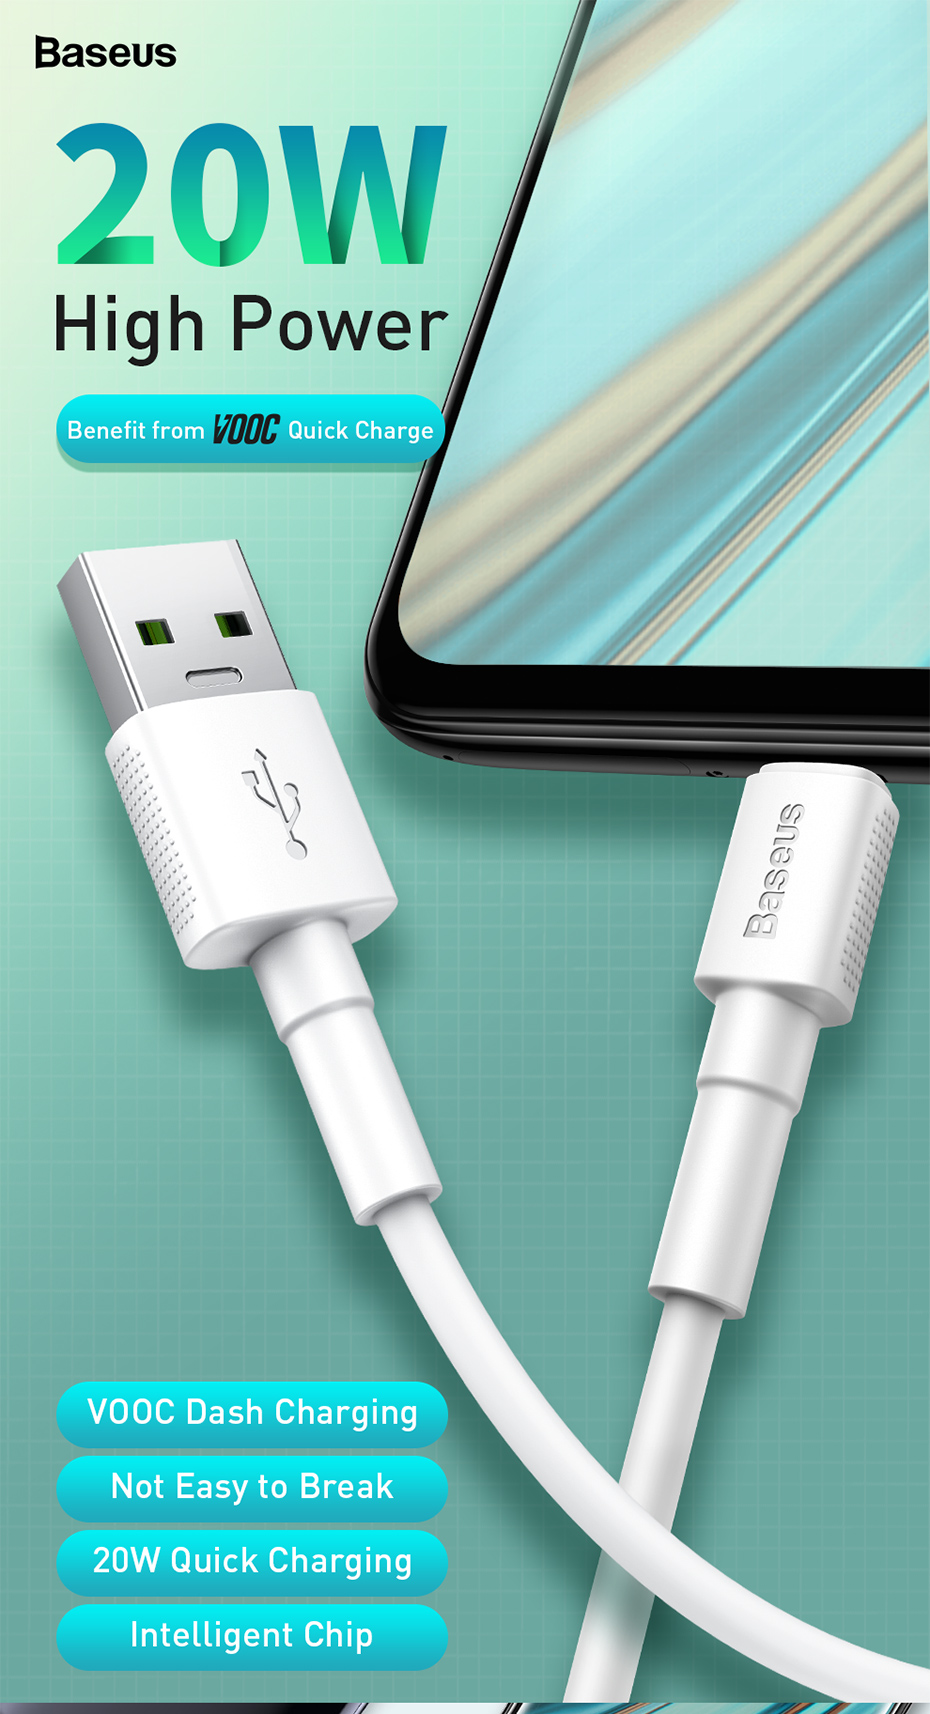 Baseus-VOOC-Dash-Charging-20w-Quick-Micro-USB-Data-Cable-for-Find-7-Series-N3-1564324-1